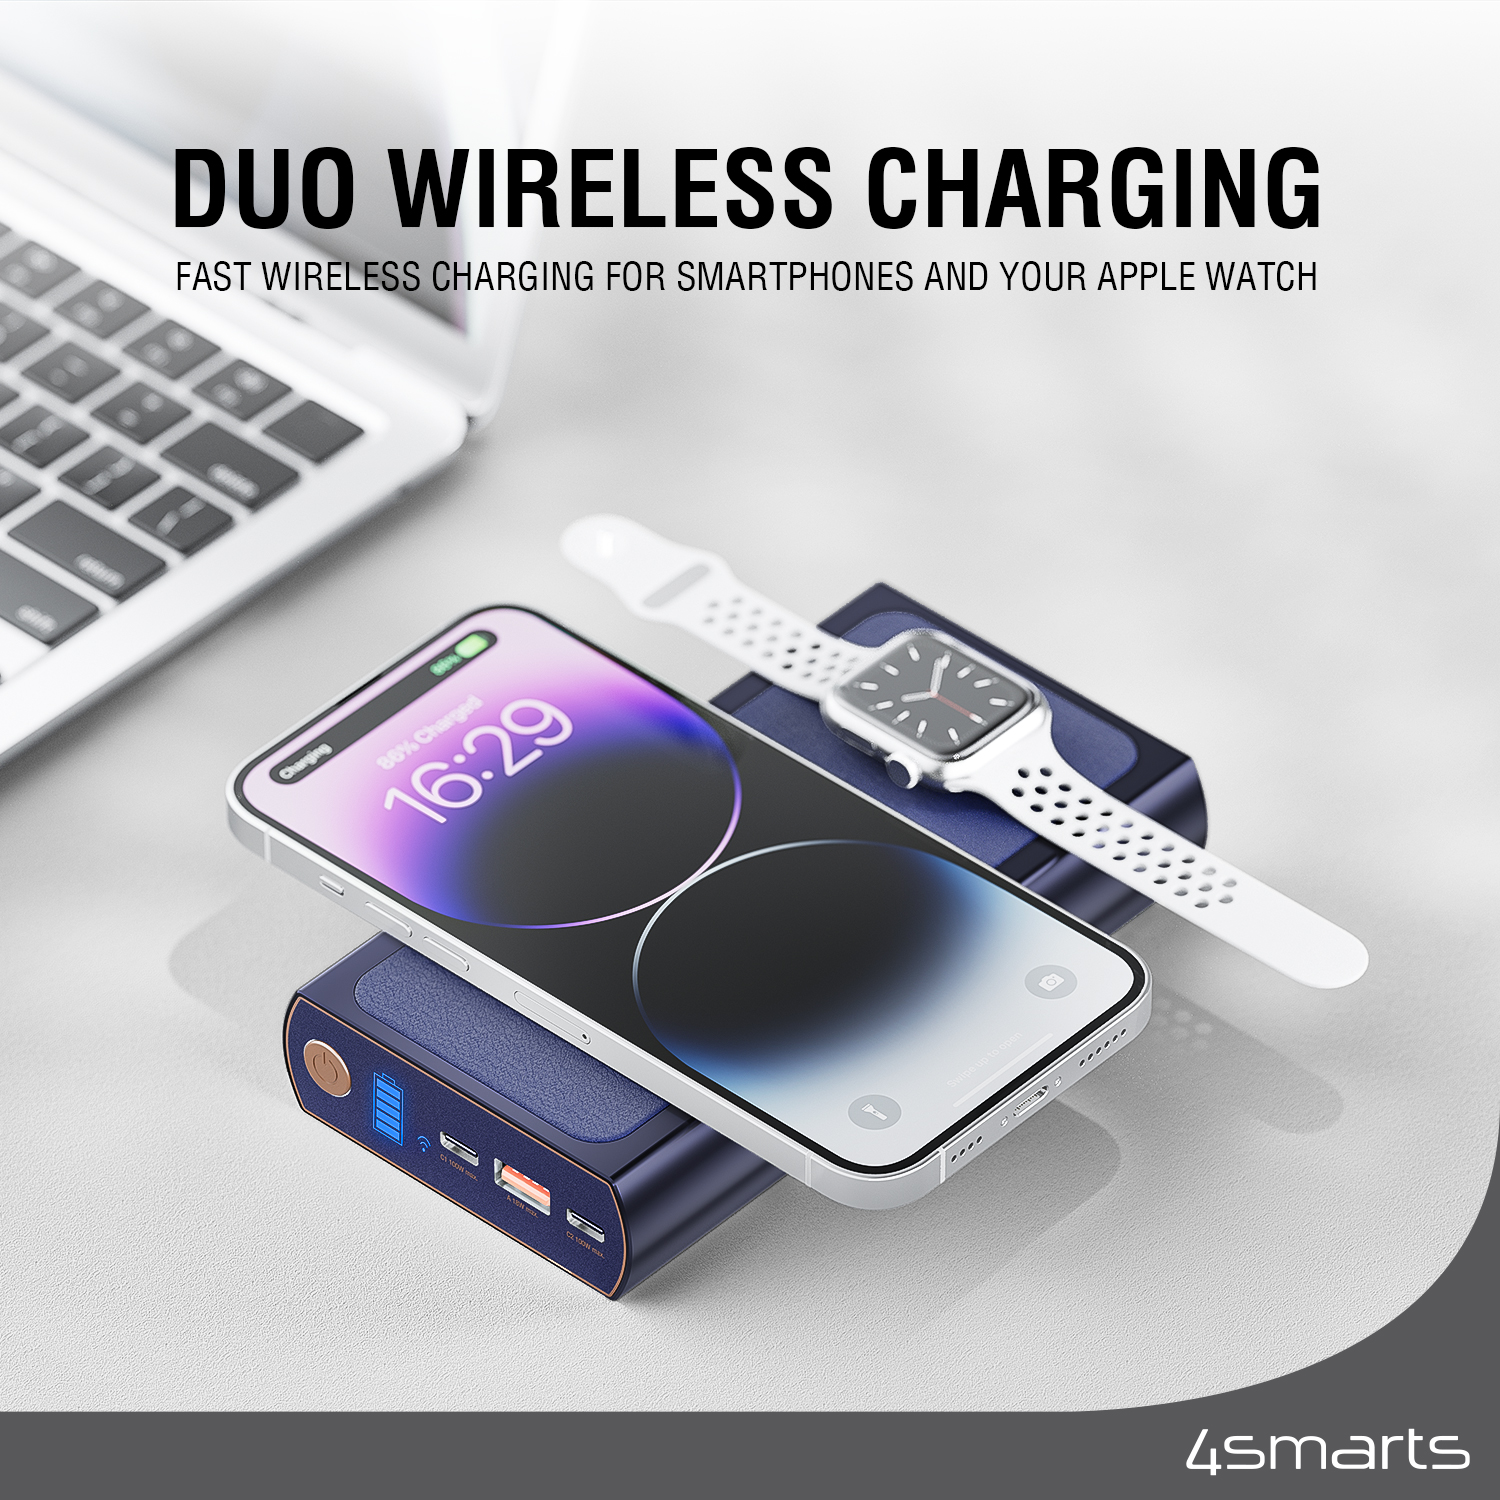 4smarts Powerbank Graphene Pro UltiMag allows you to quickly charge smartphones and your Apple Watch wirelessly.